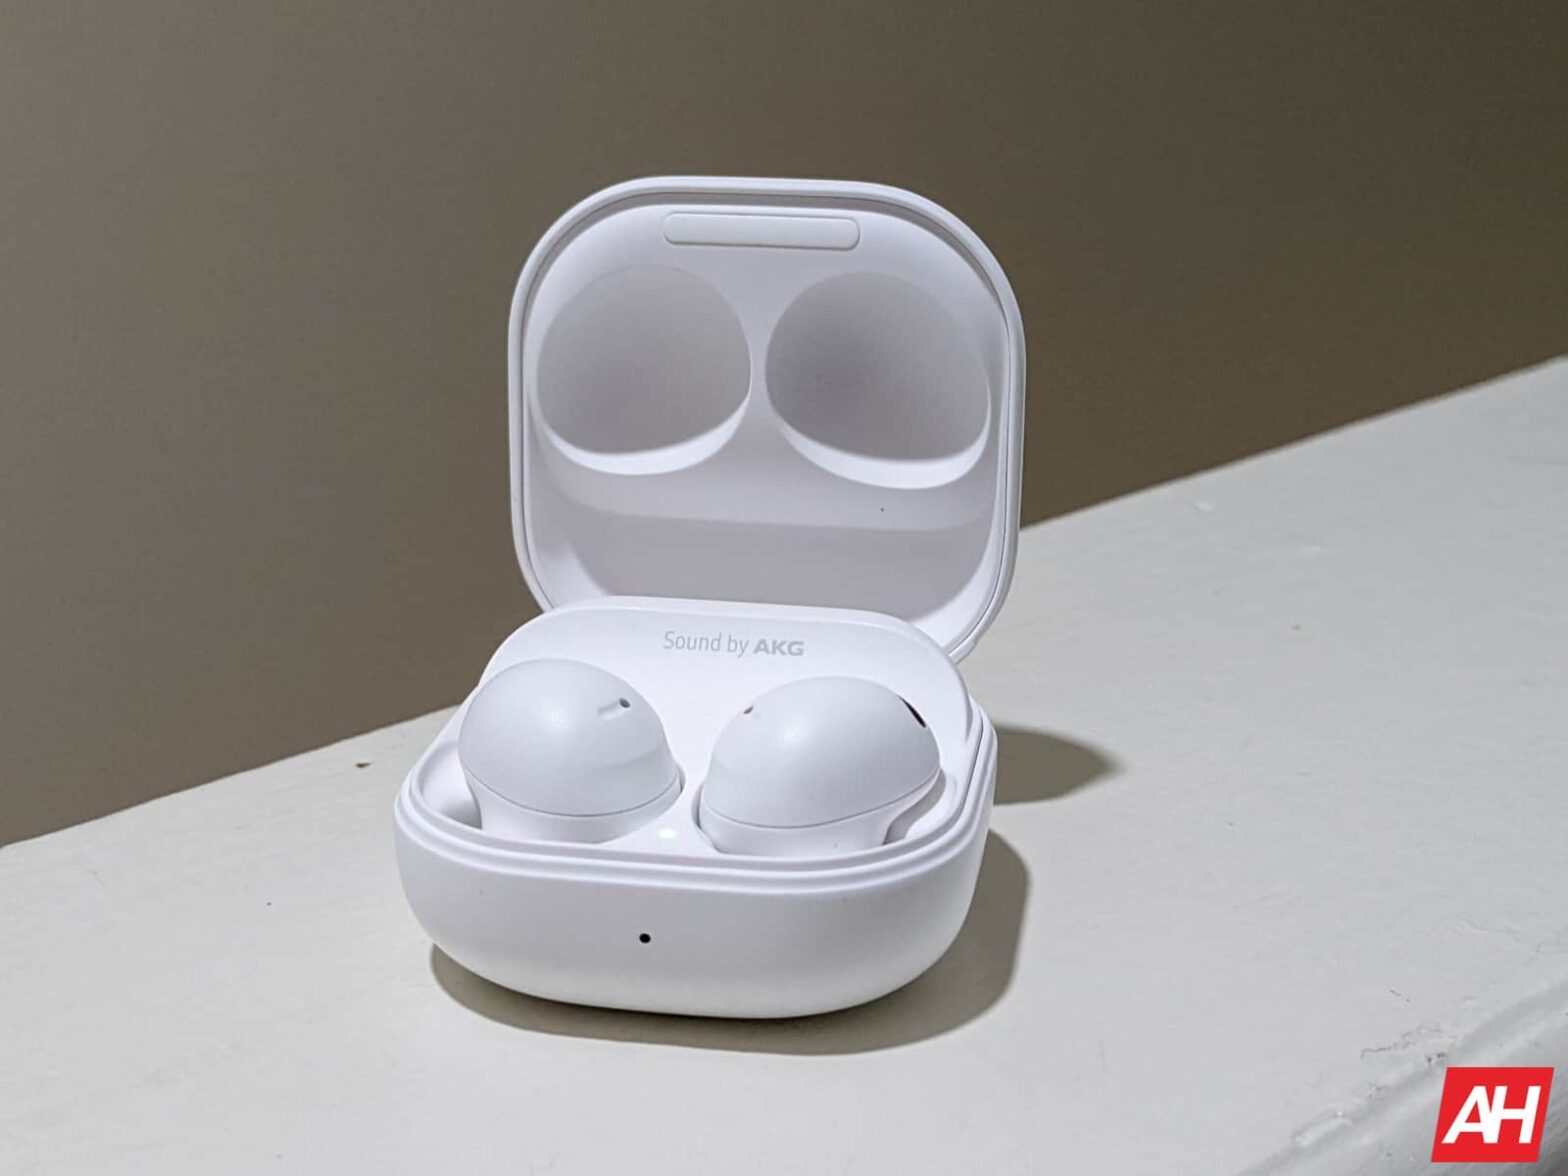 Samsung is readying anew pair of Galaxy Buds